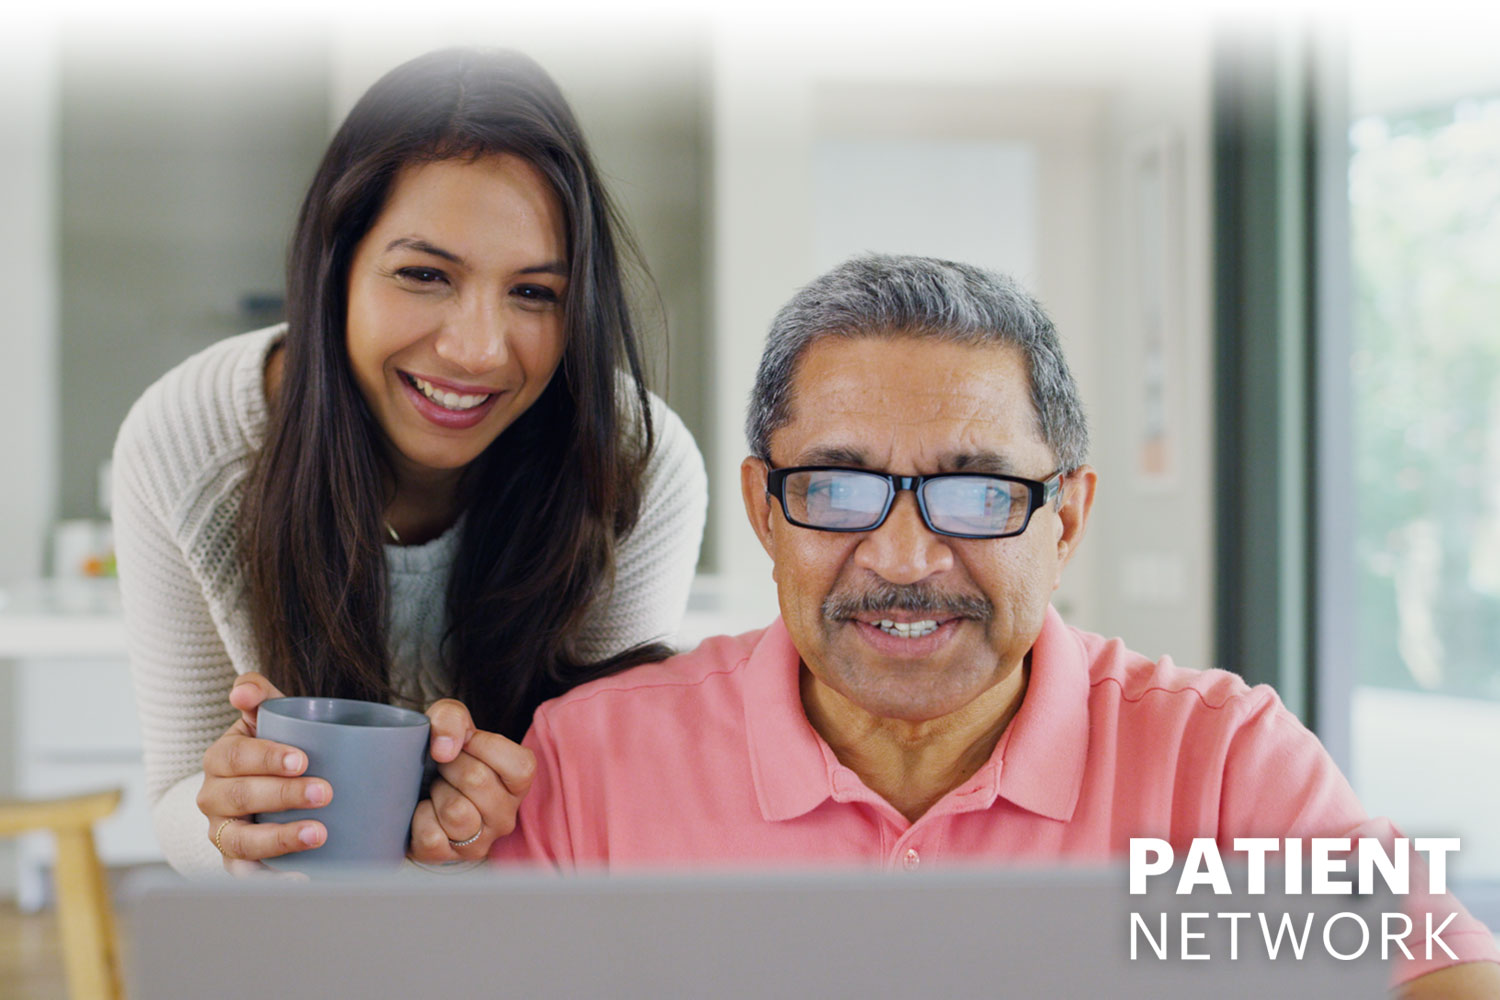 daughter encouraging her father while he looks at a laptop, Patient Network logo